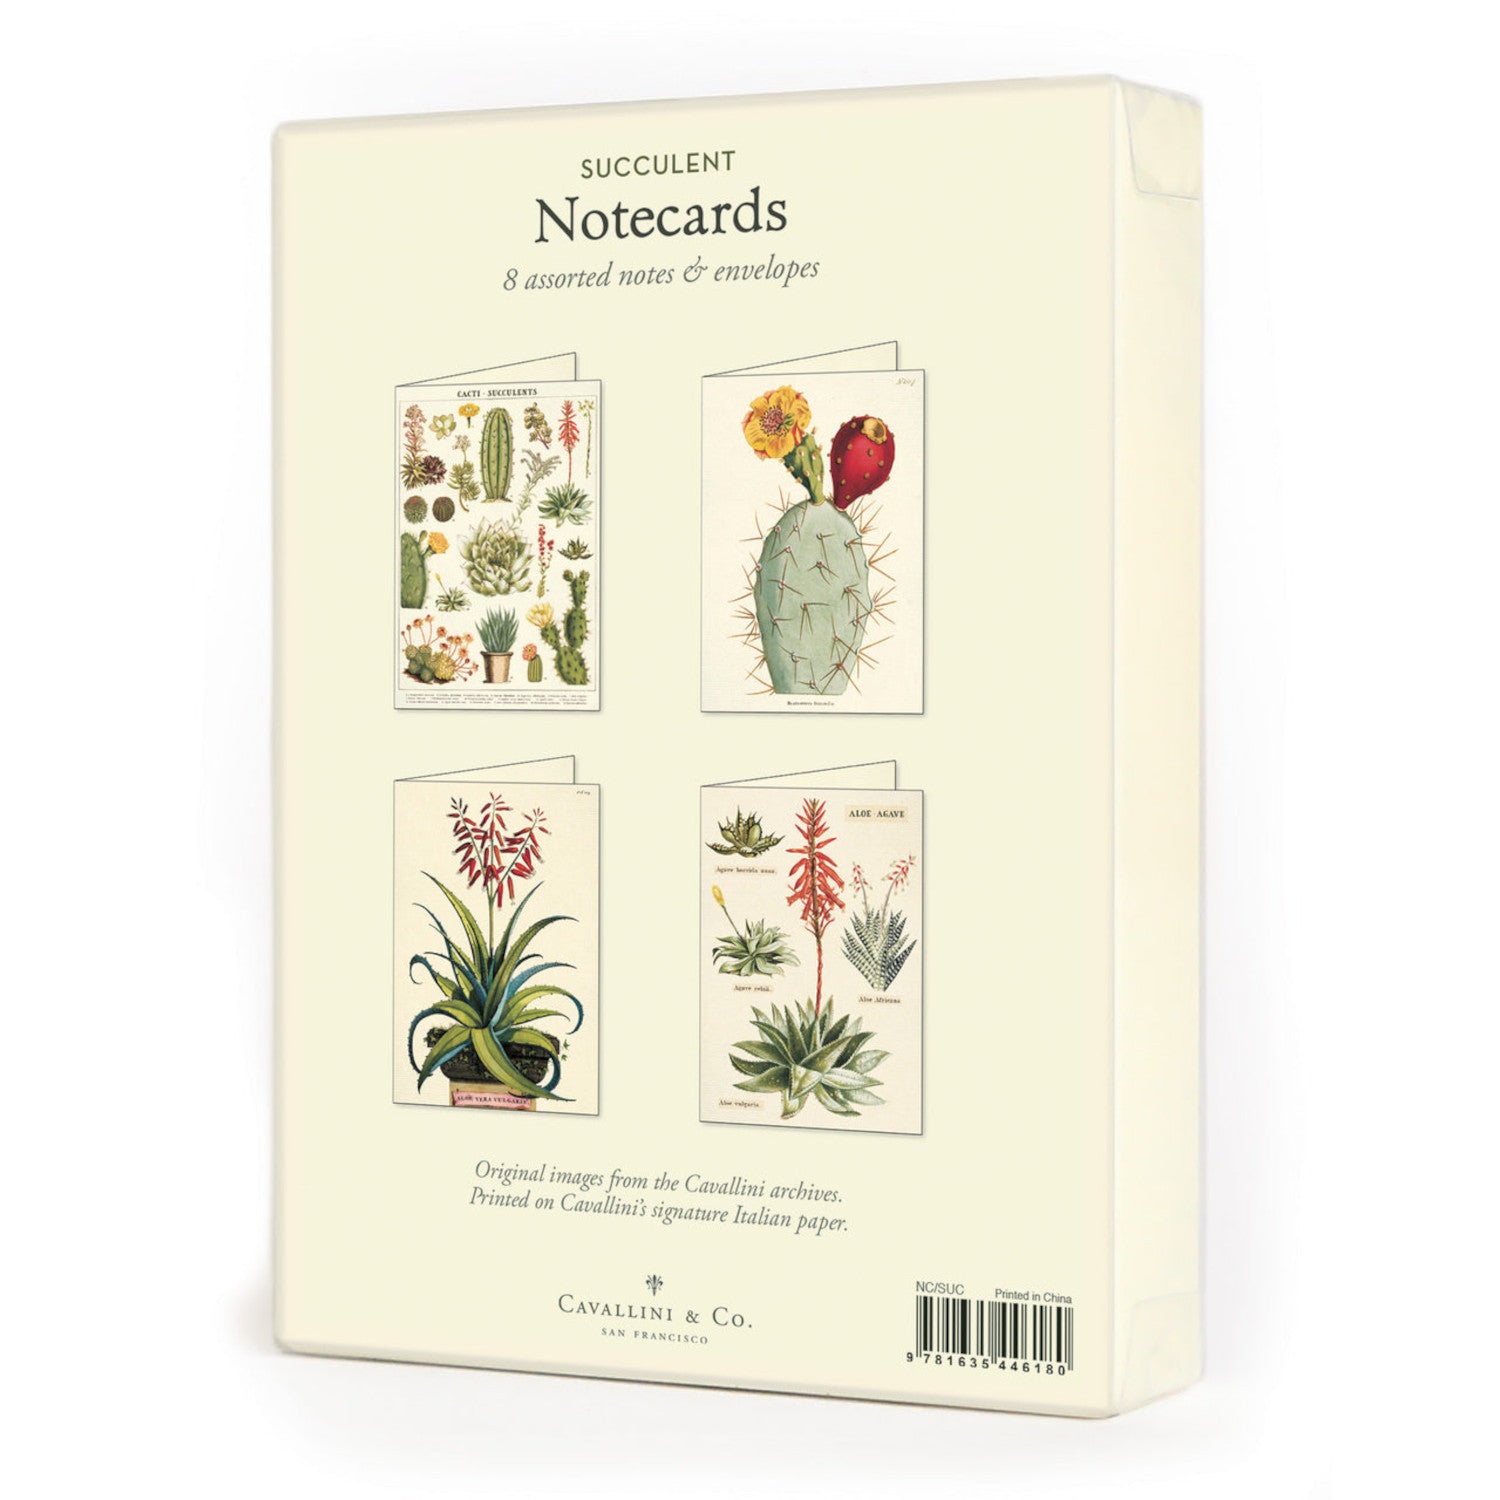 Decorative tins containing Succulents Notecards with a cactus and succulents theme, featuring Cavallini Papers &amp; Co.&